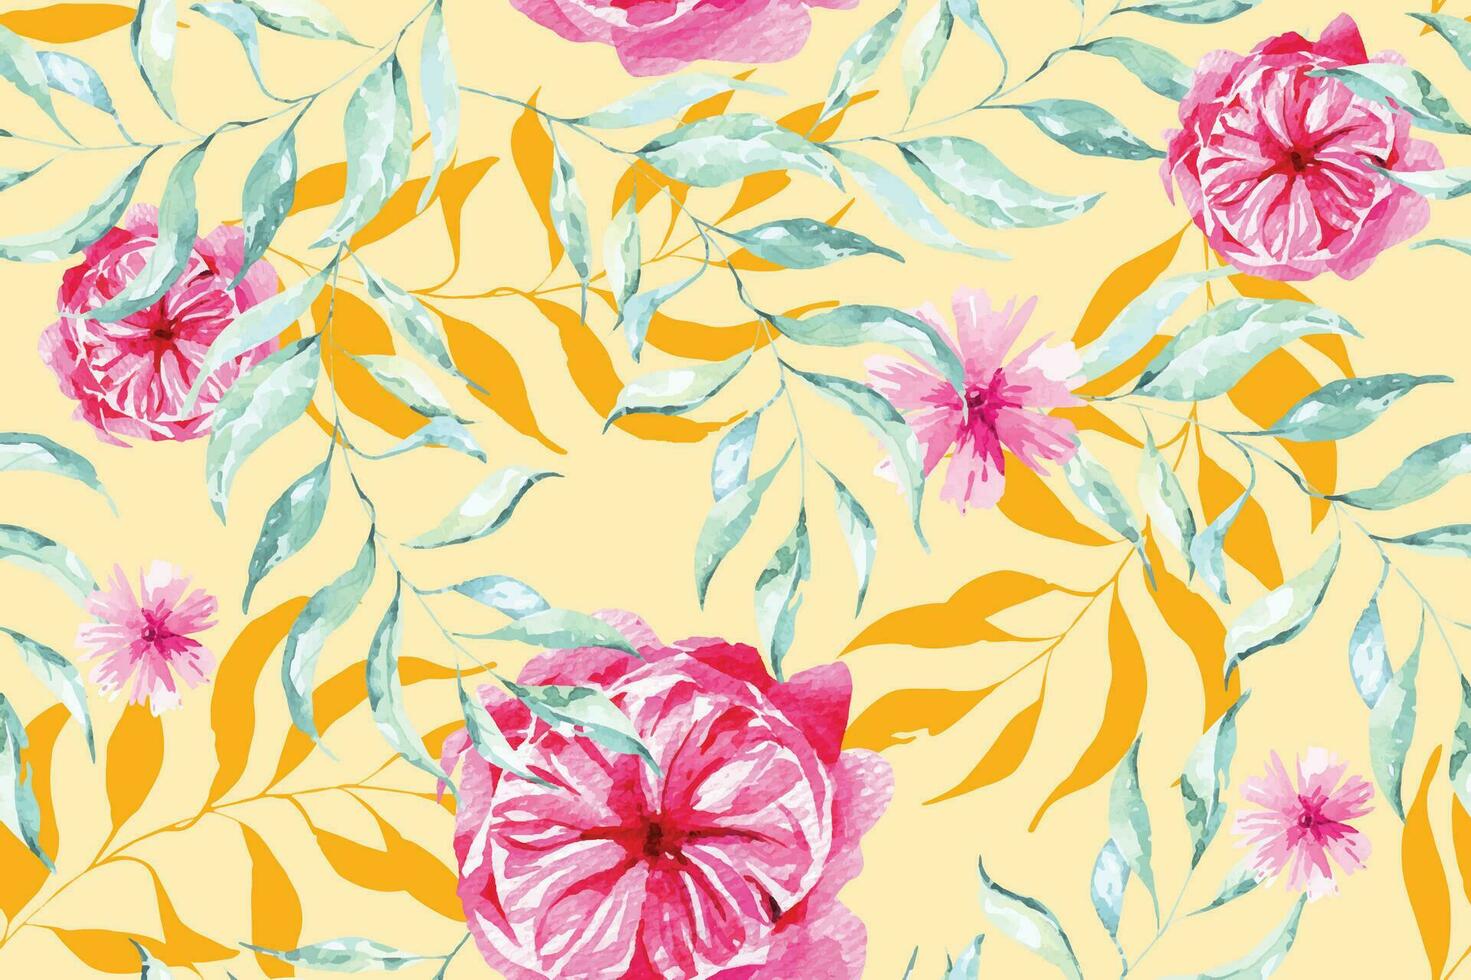 Flower and rose seamless pattern with watercolor.Designed for fabric and wallpaper, vintage style.Blooming floral painting for summer.Botany flower pastel background vector